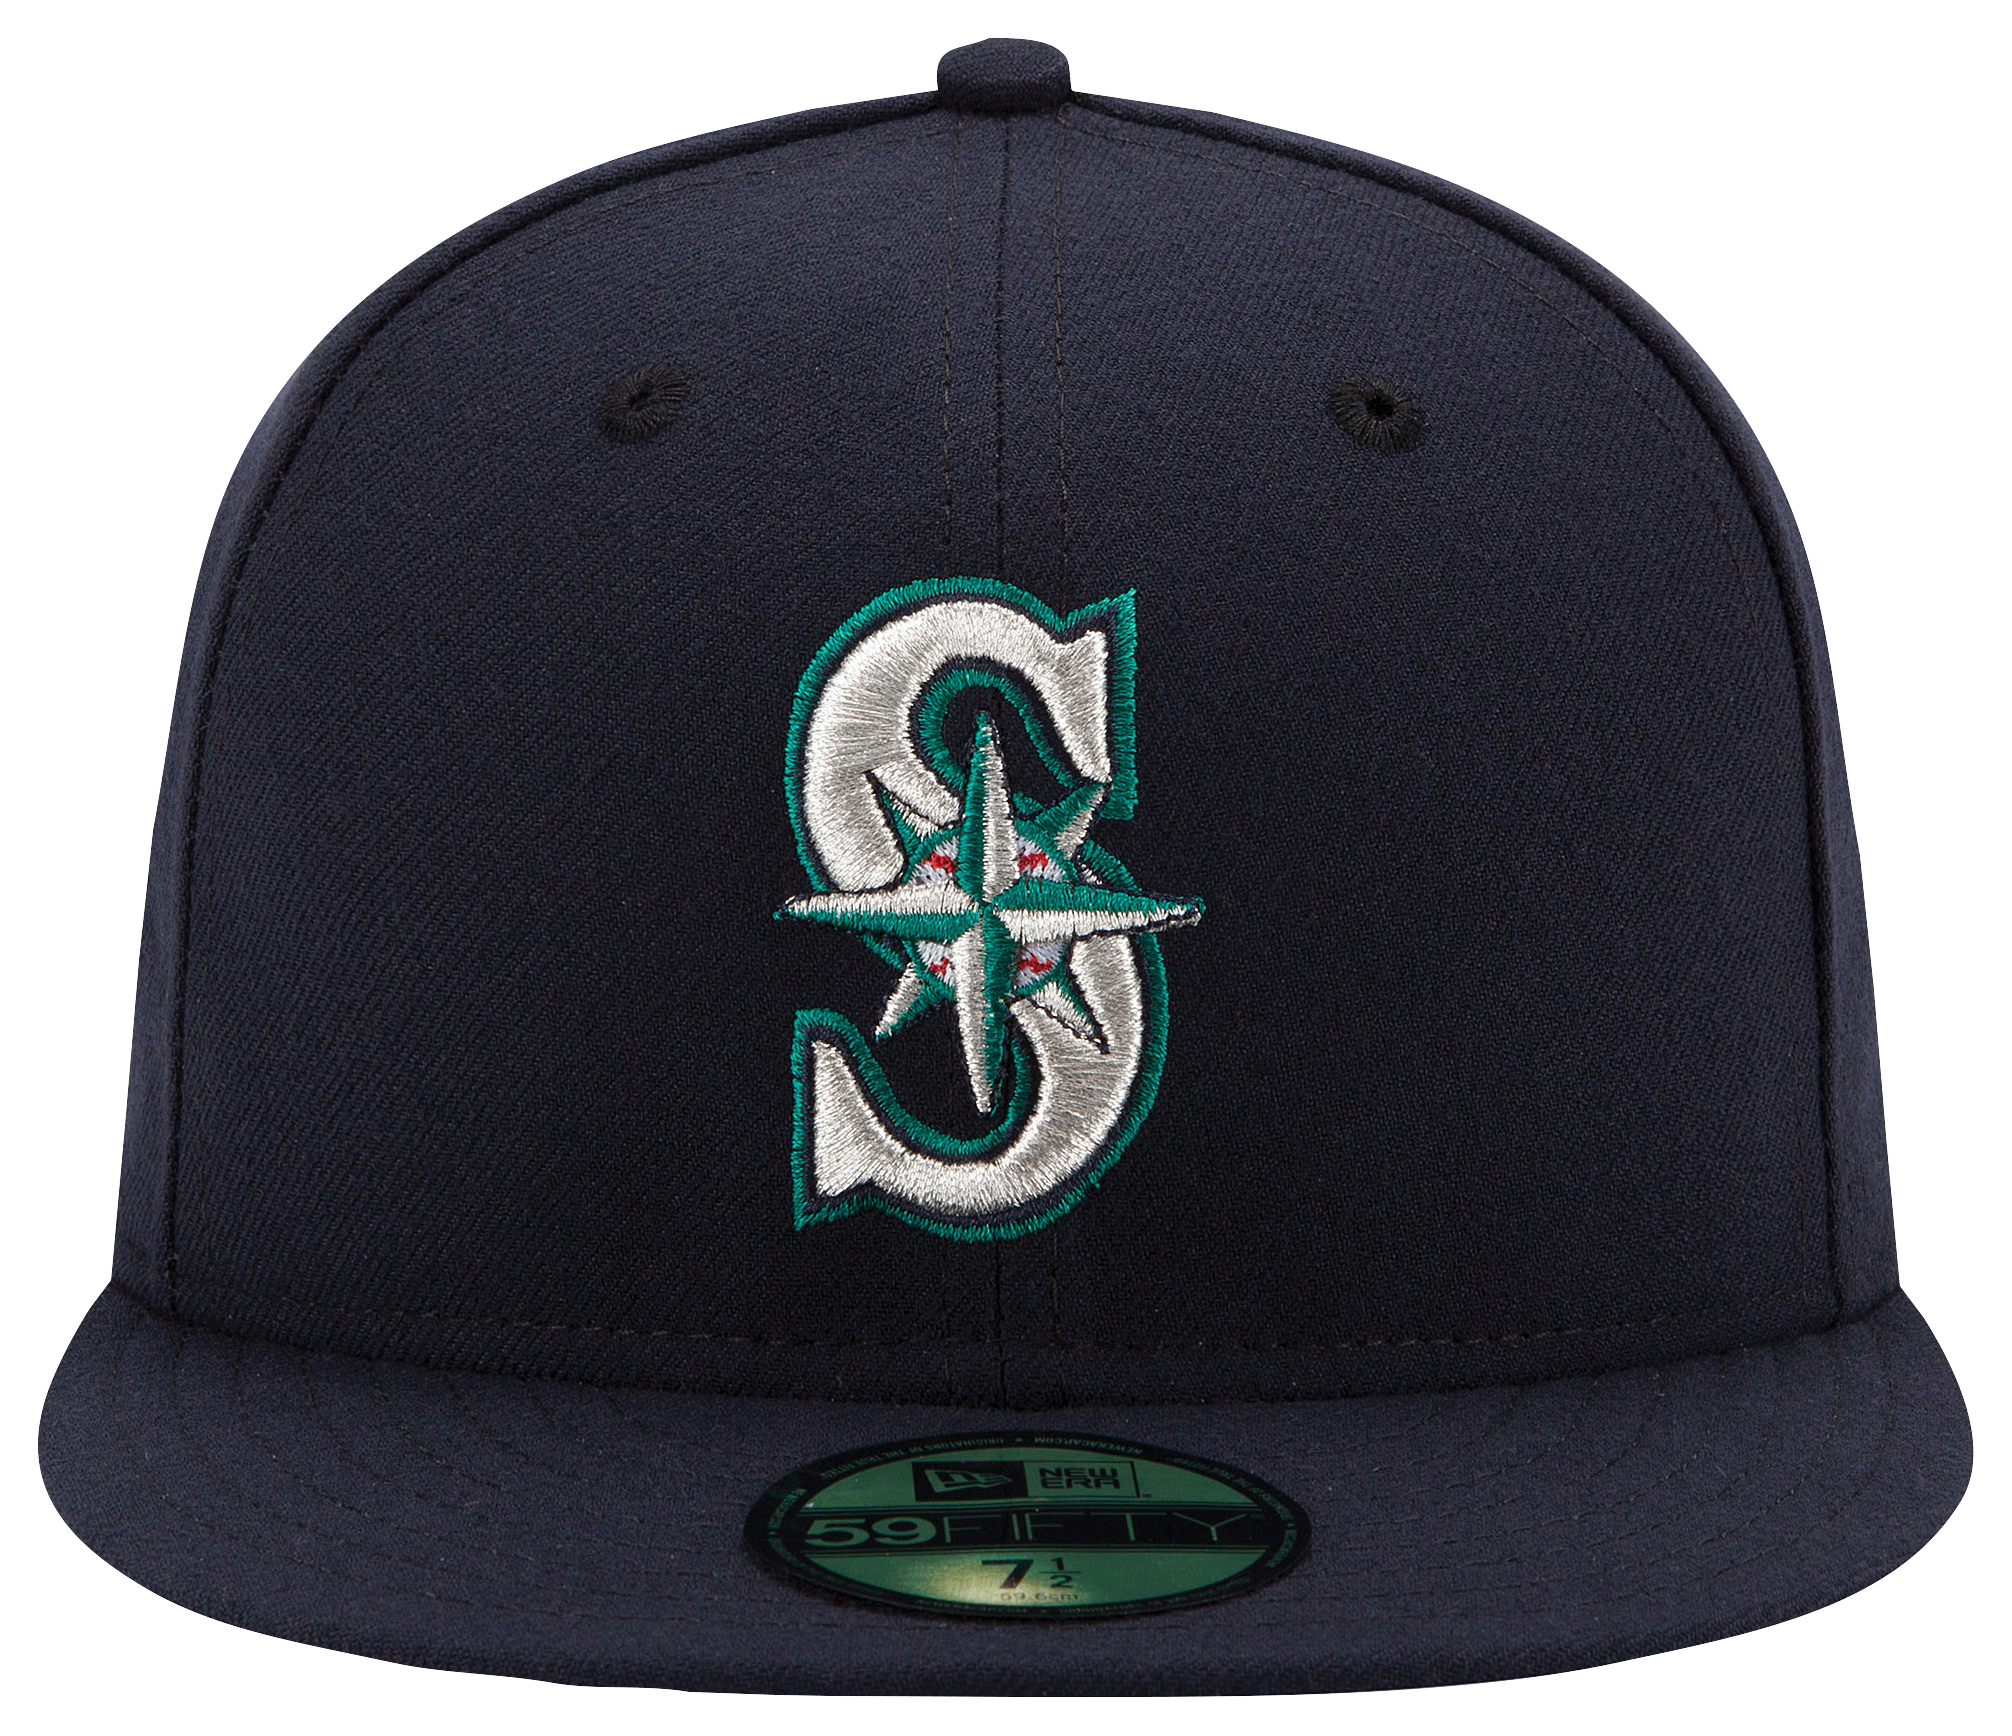 New Era Mariners 59Fifty Authentic Cap - Adult